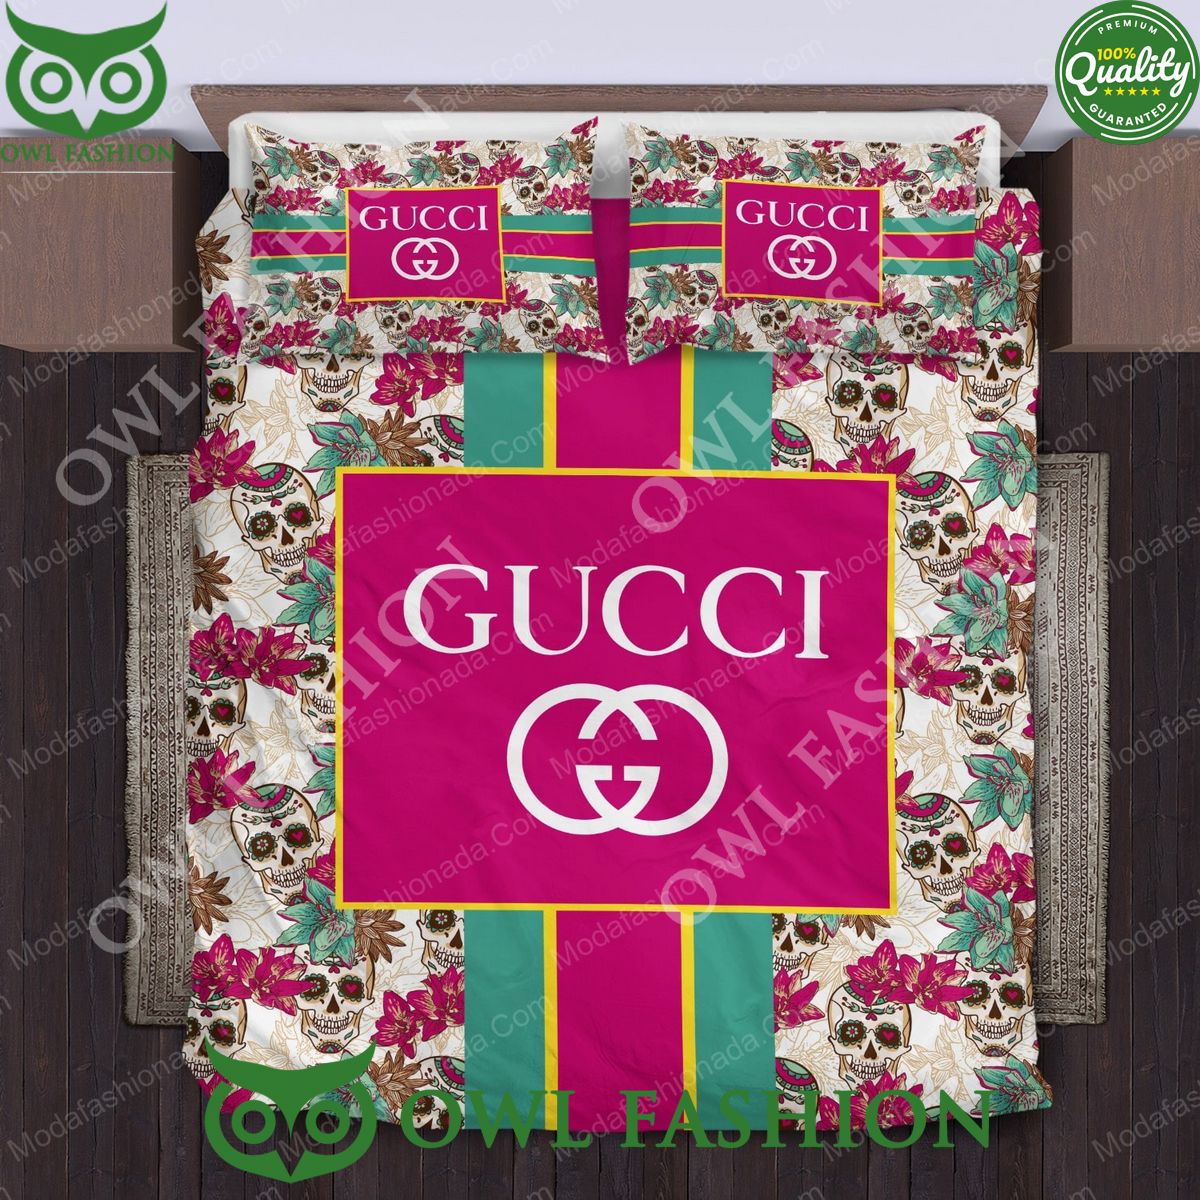 Gucci Sugar Skull Bedding Sets Beauty is power; a smile is its sword.